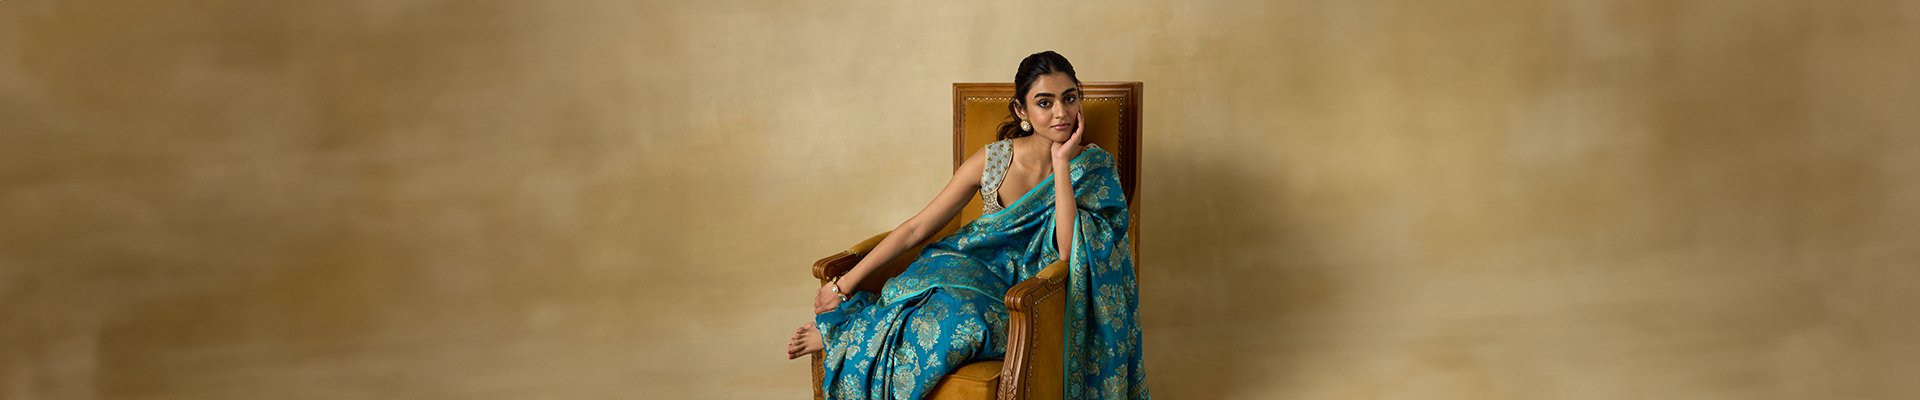 Pure_Handwoven_Sarees_Capturing_the_Essence_of_India's_Craft_Traditions_WeaverStory